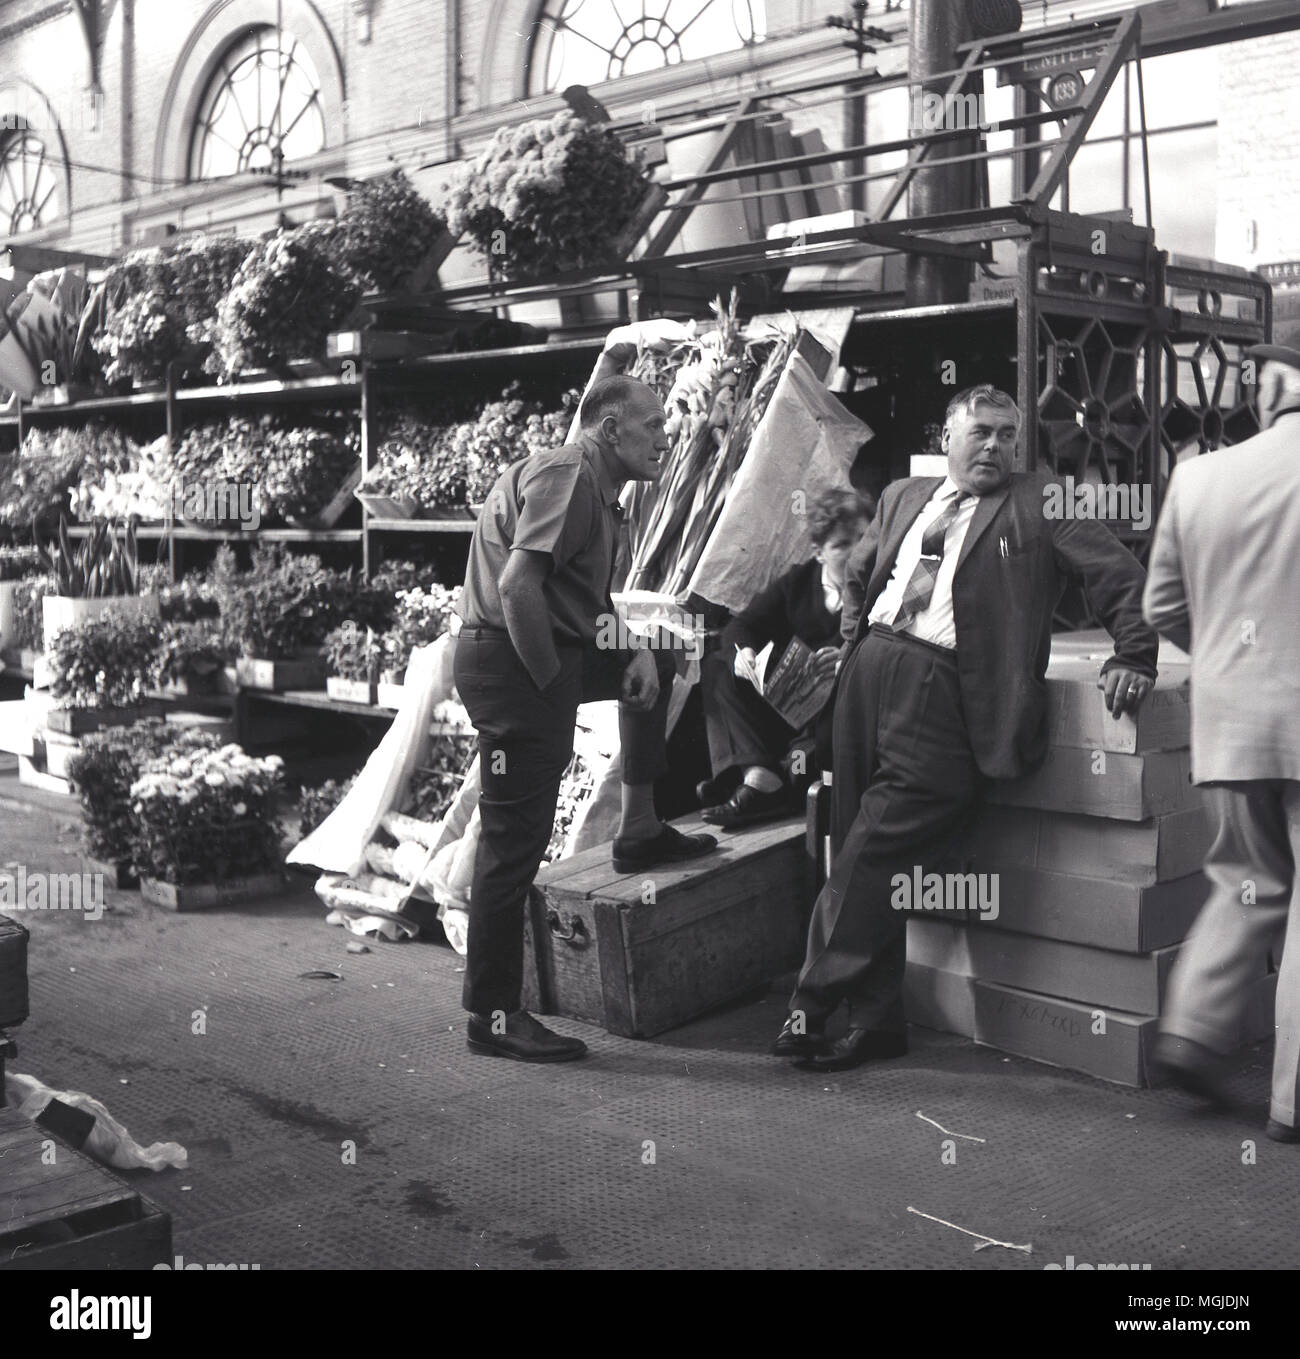 1960s, historical, flower traders outside their stall at london's